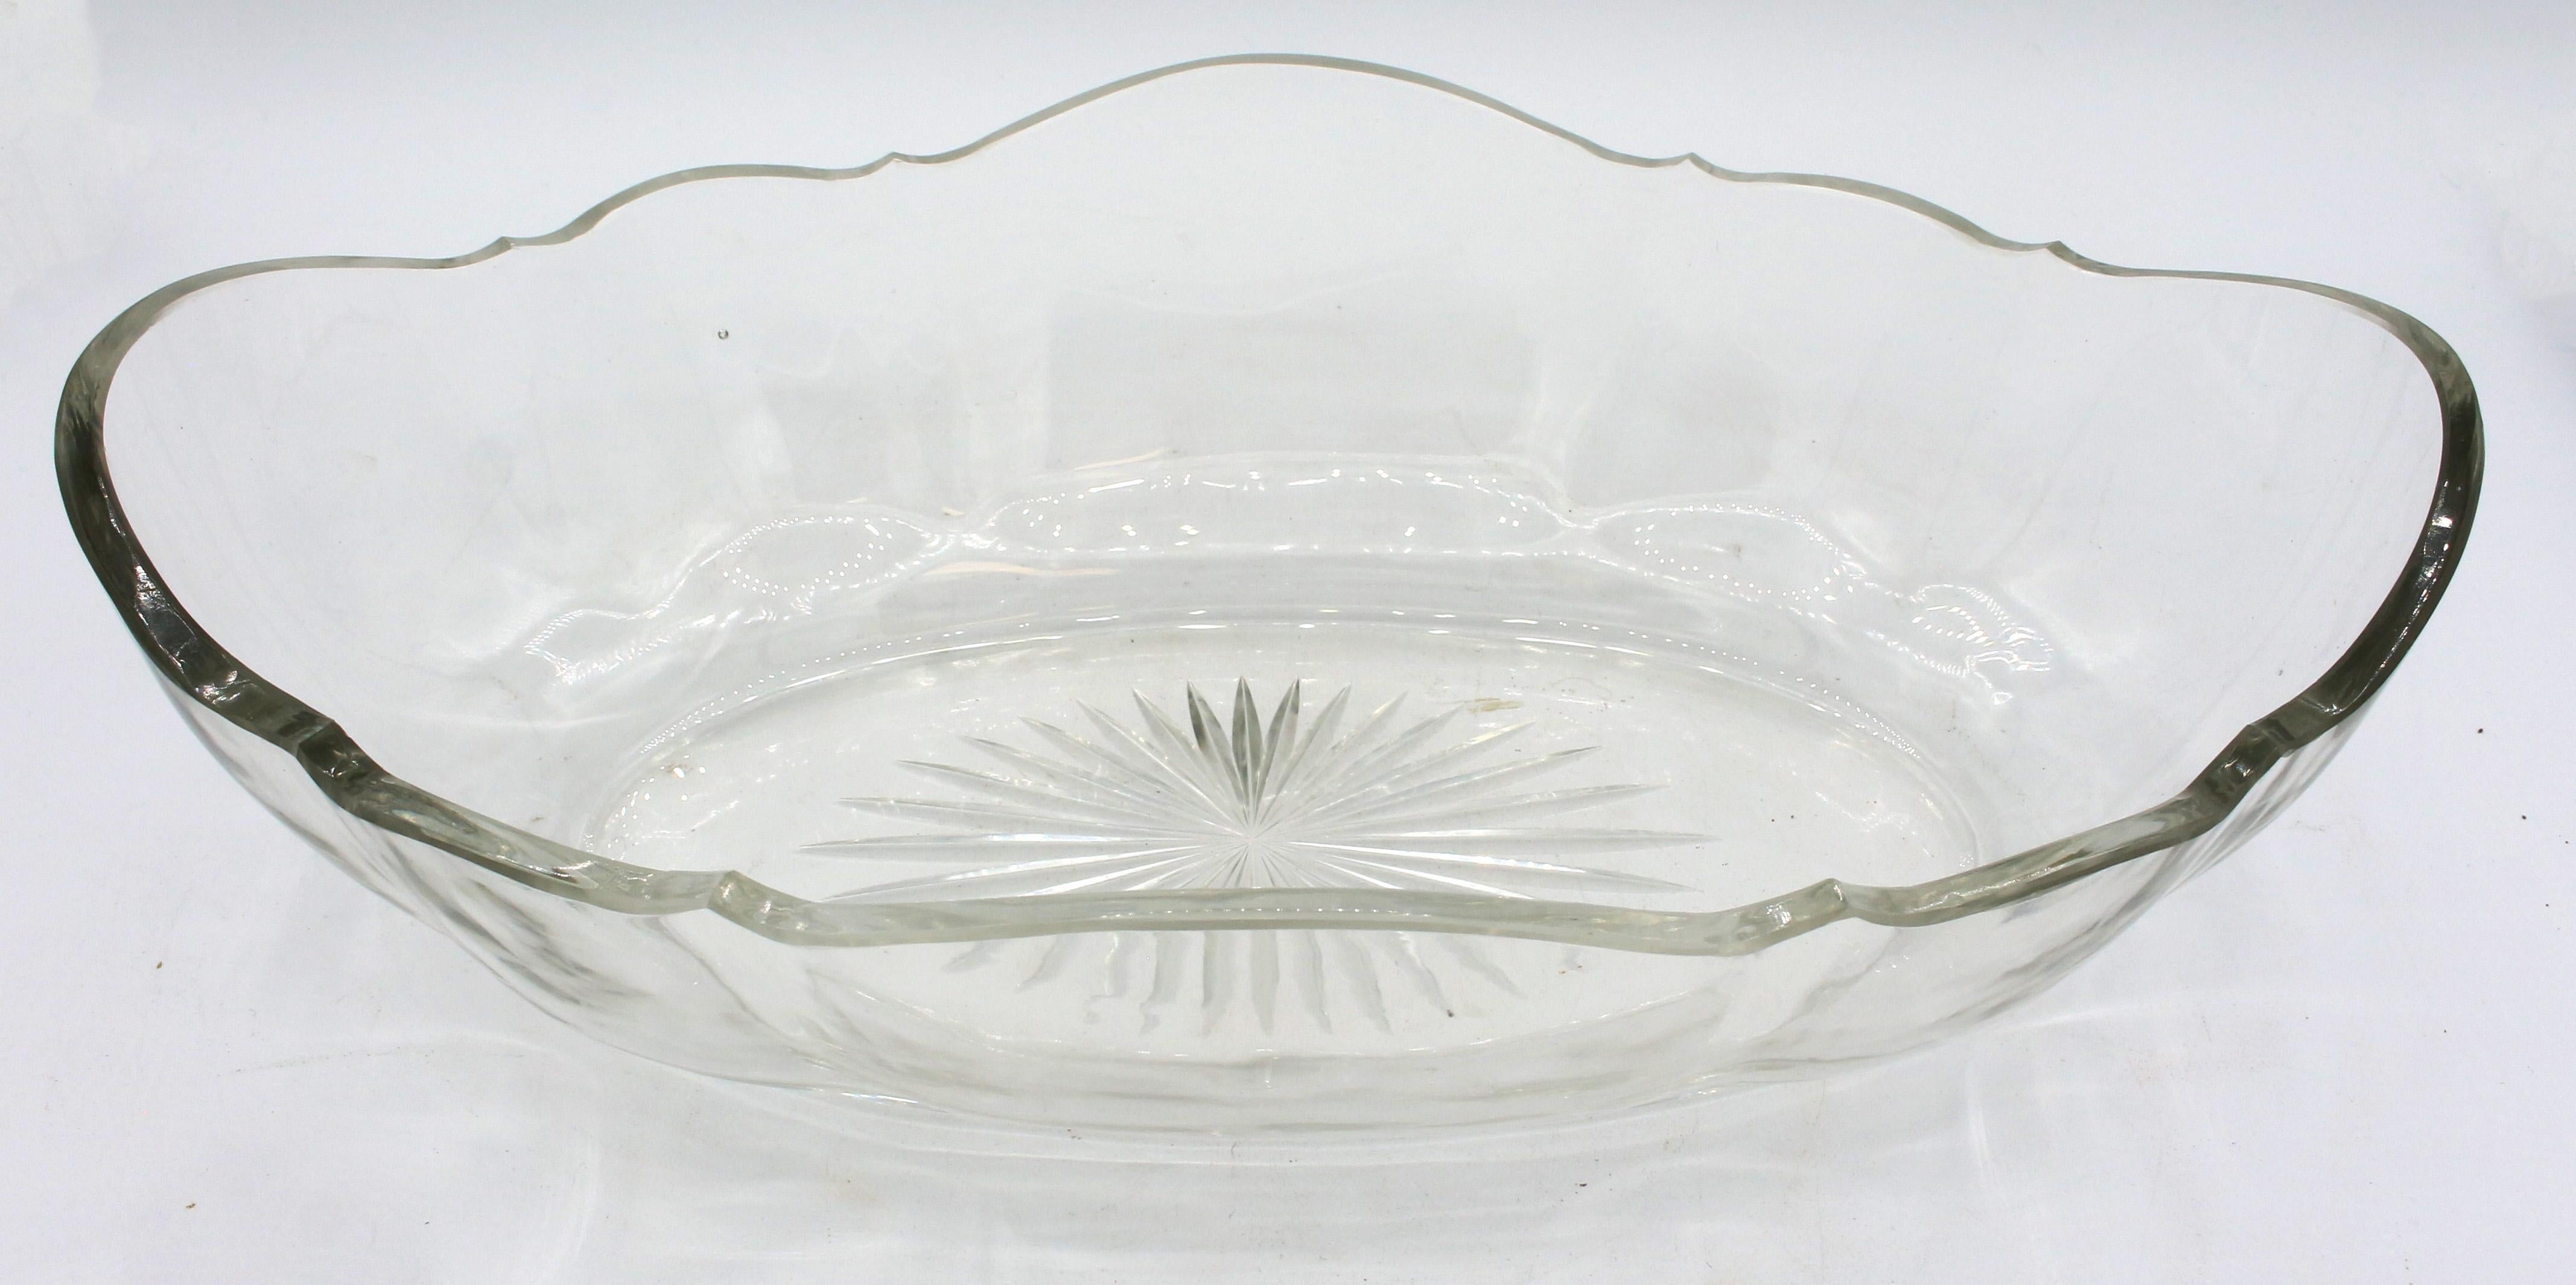 Gilt 1911 Continental Silver Centerpiece Bowl with Glass Liner